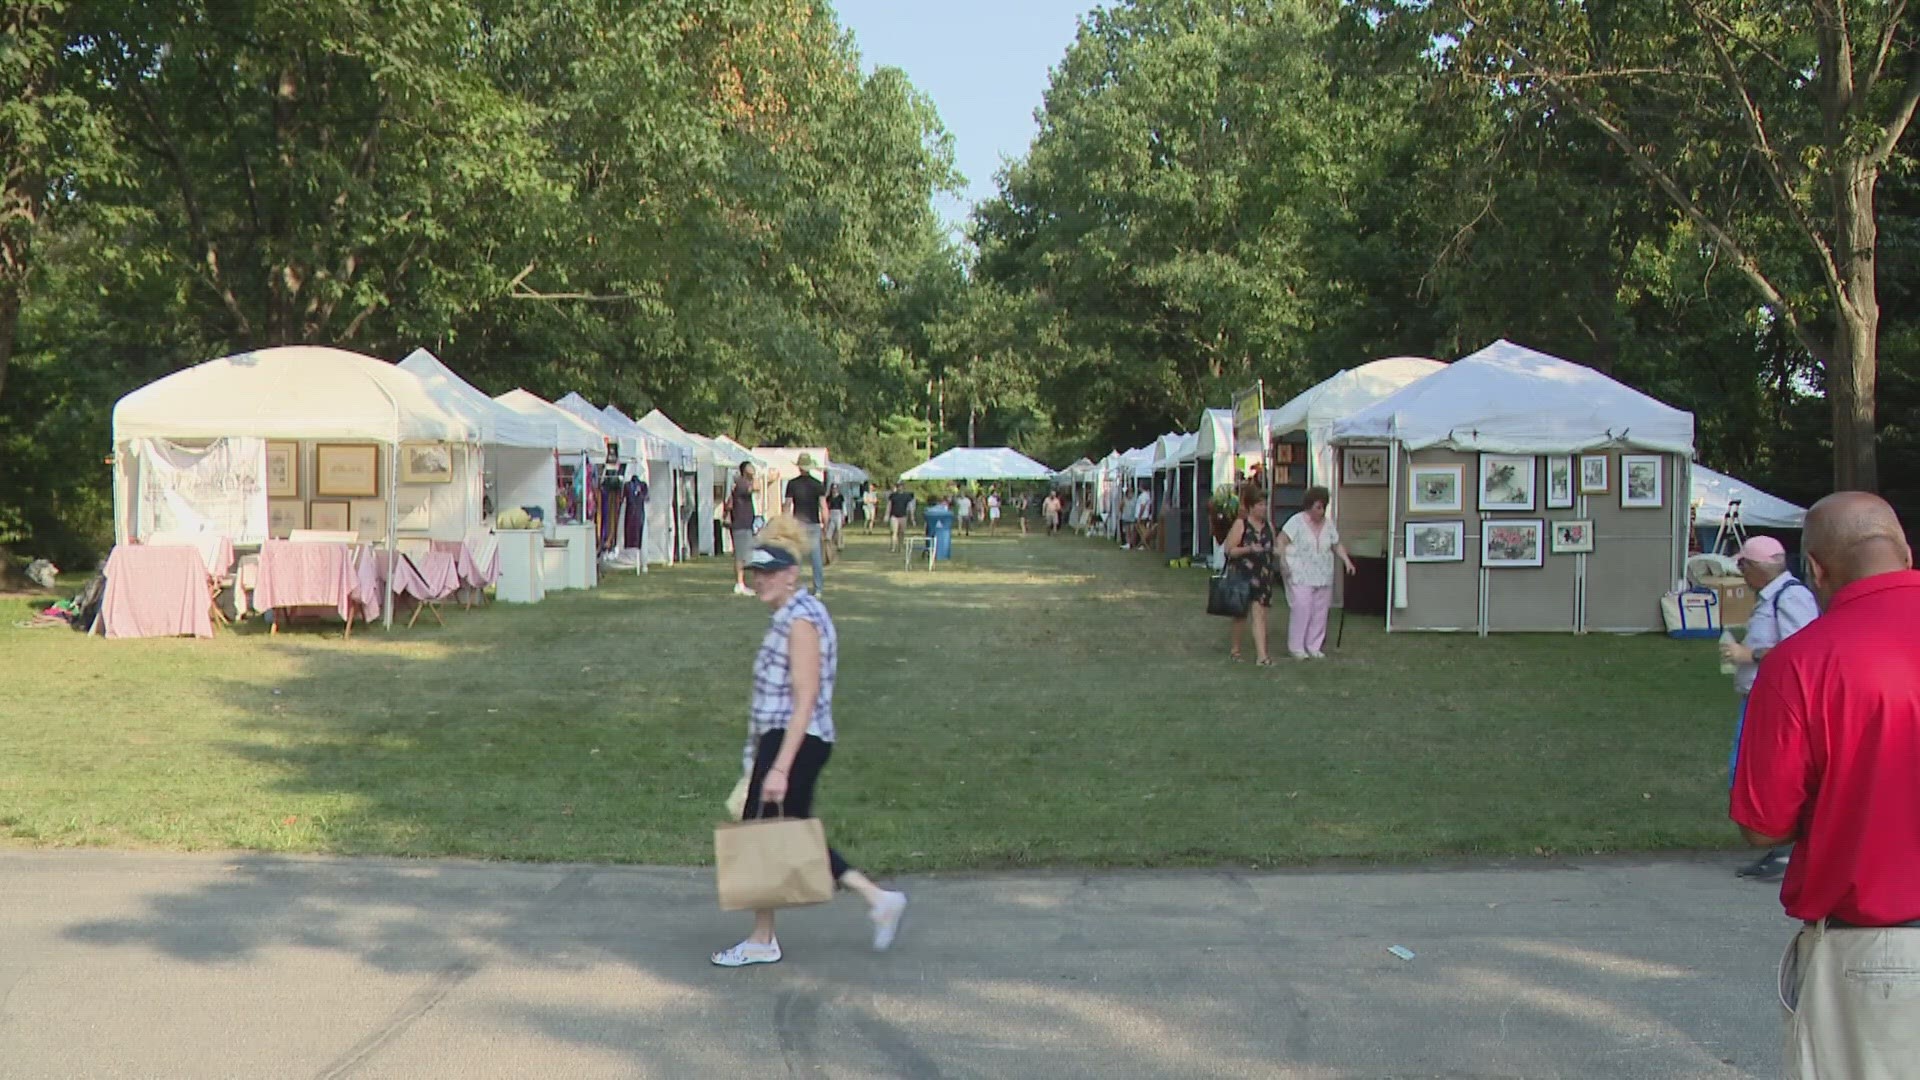 350 artists from across the country will gather at Newfields this weekend.